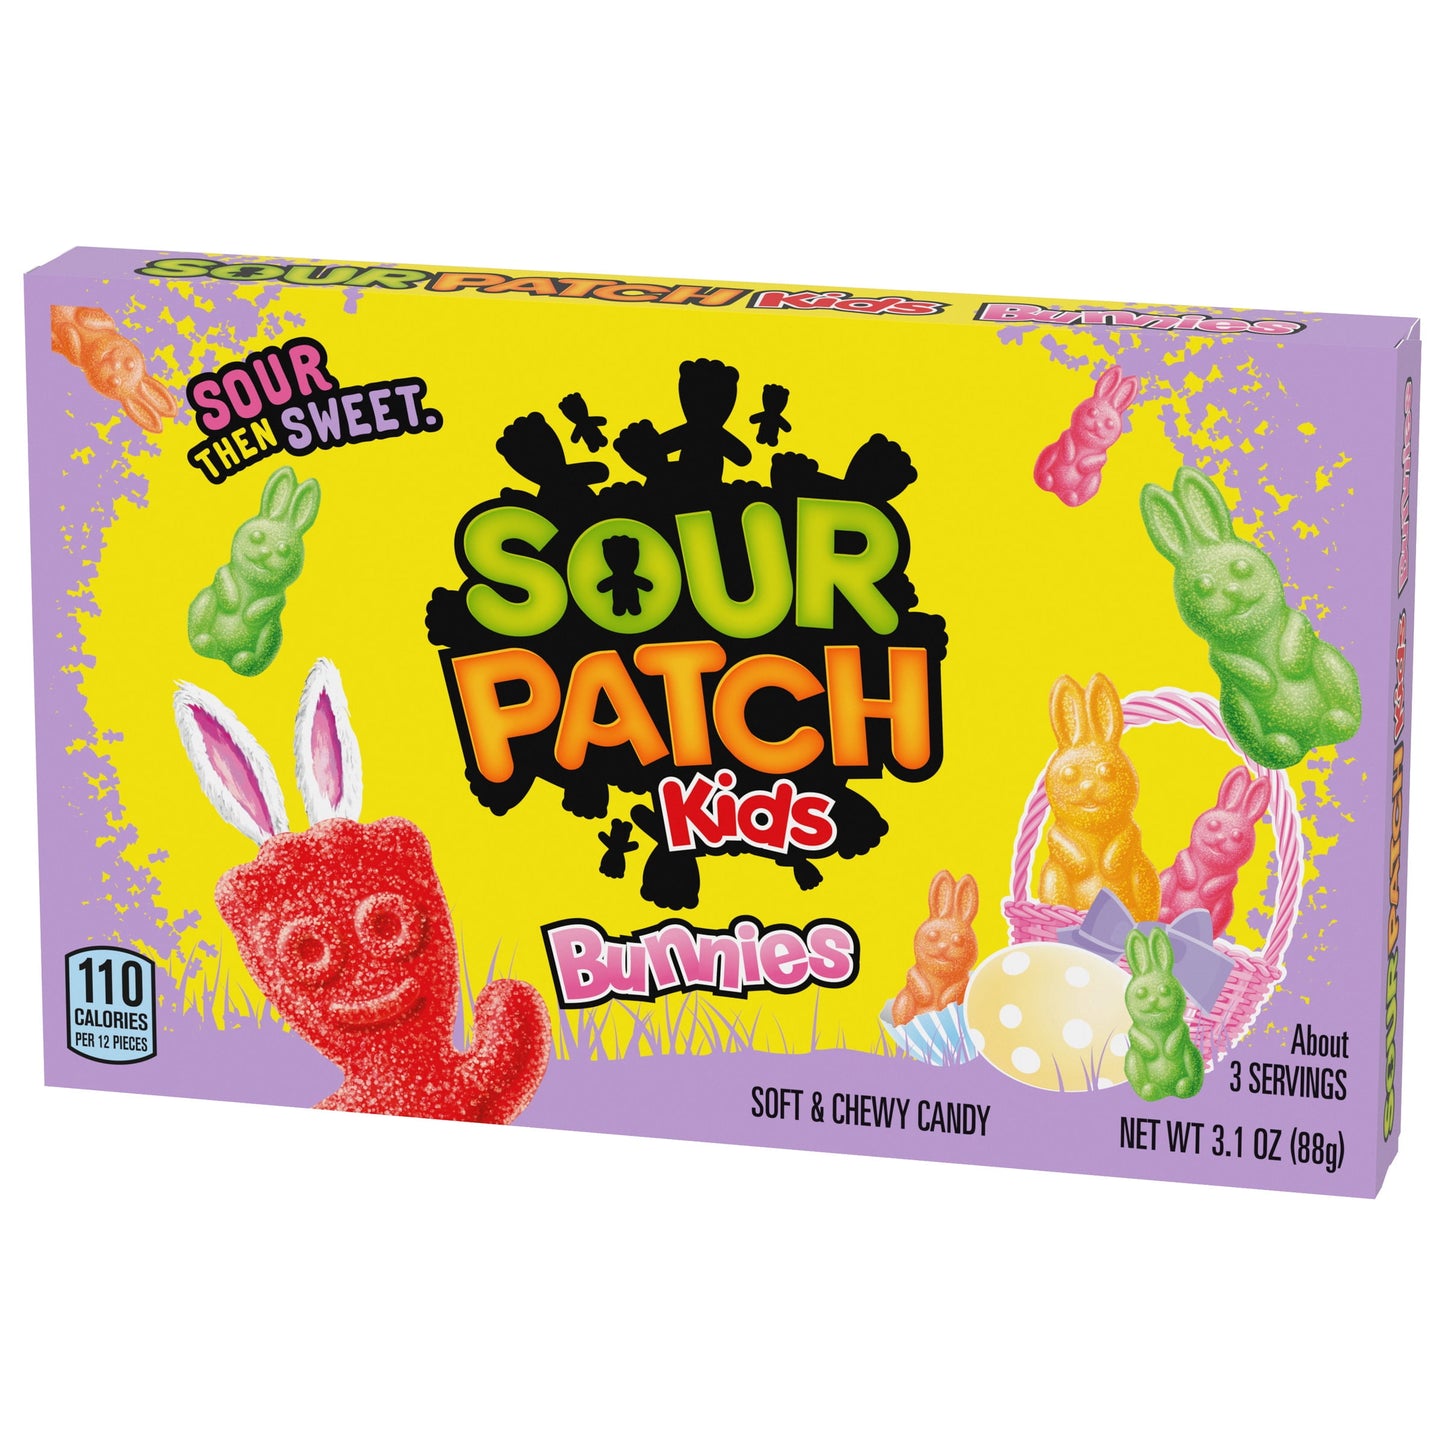 Bunnies Soft & Chewy Easter Candy, 3.1 Oz